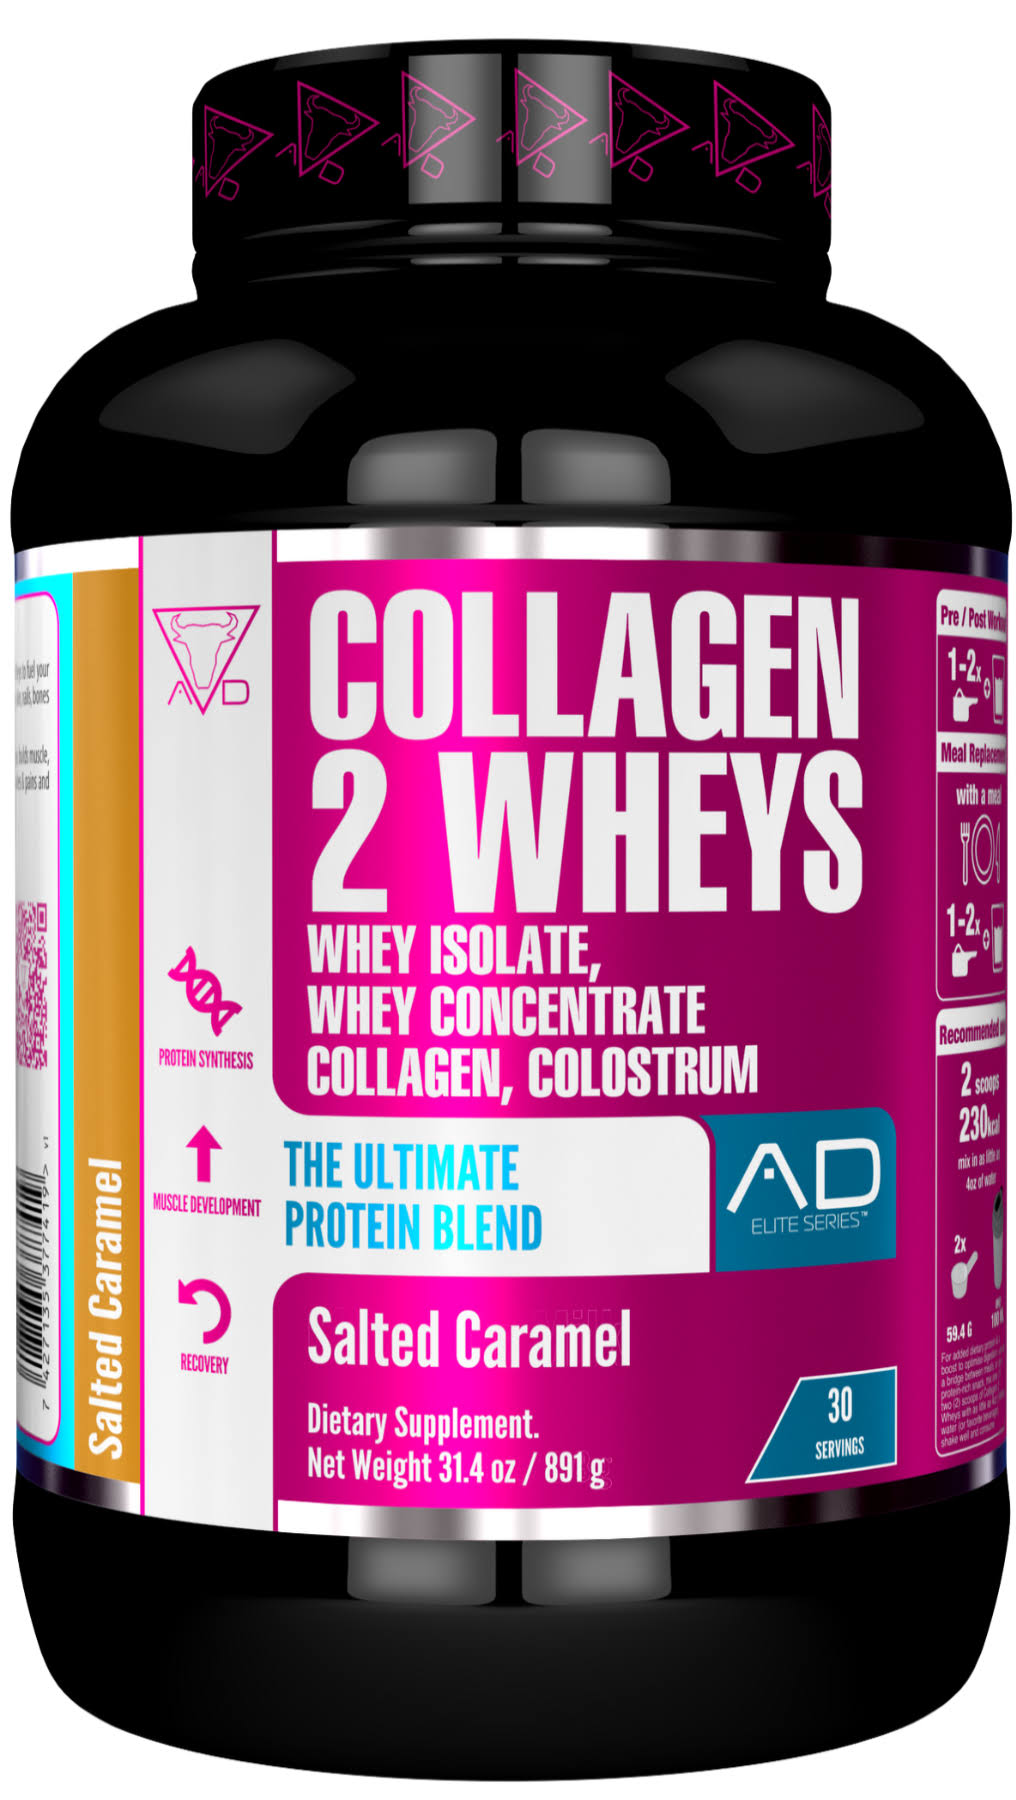 Project Ad Collagen 2 Wheys Salted Caramel